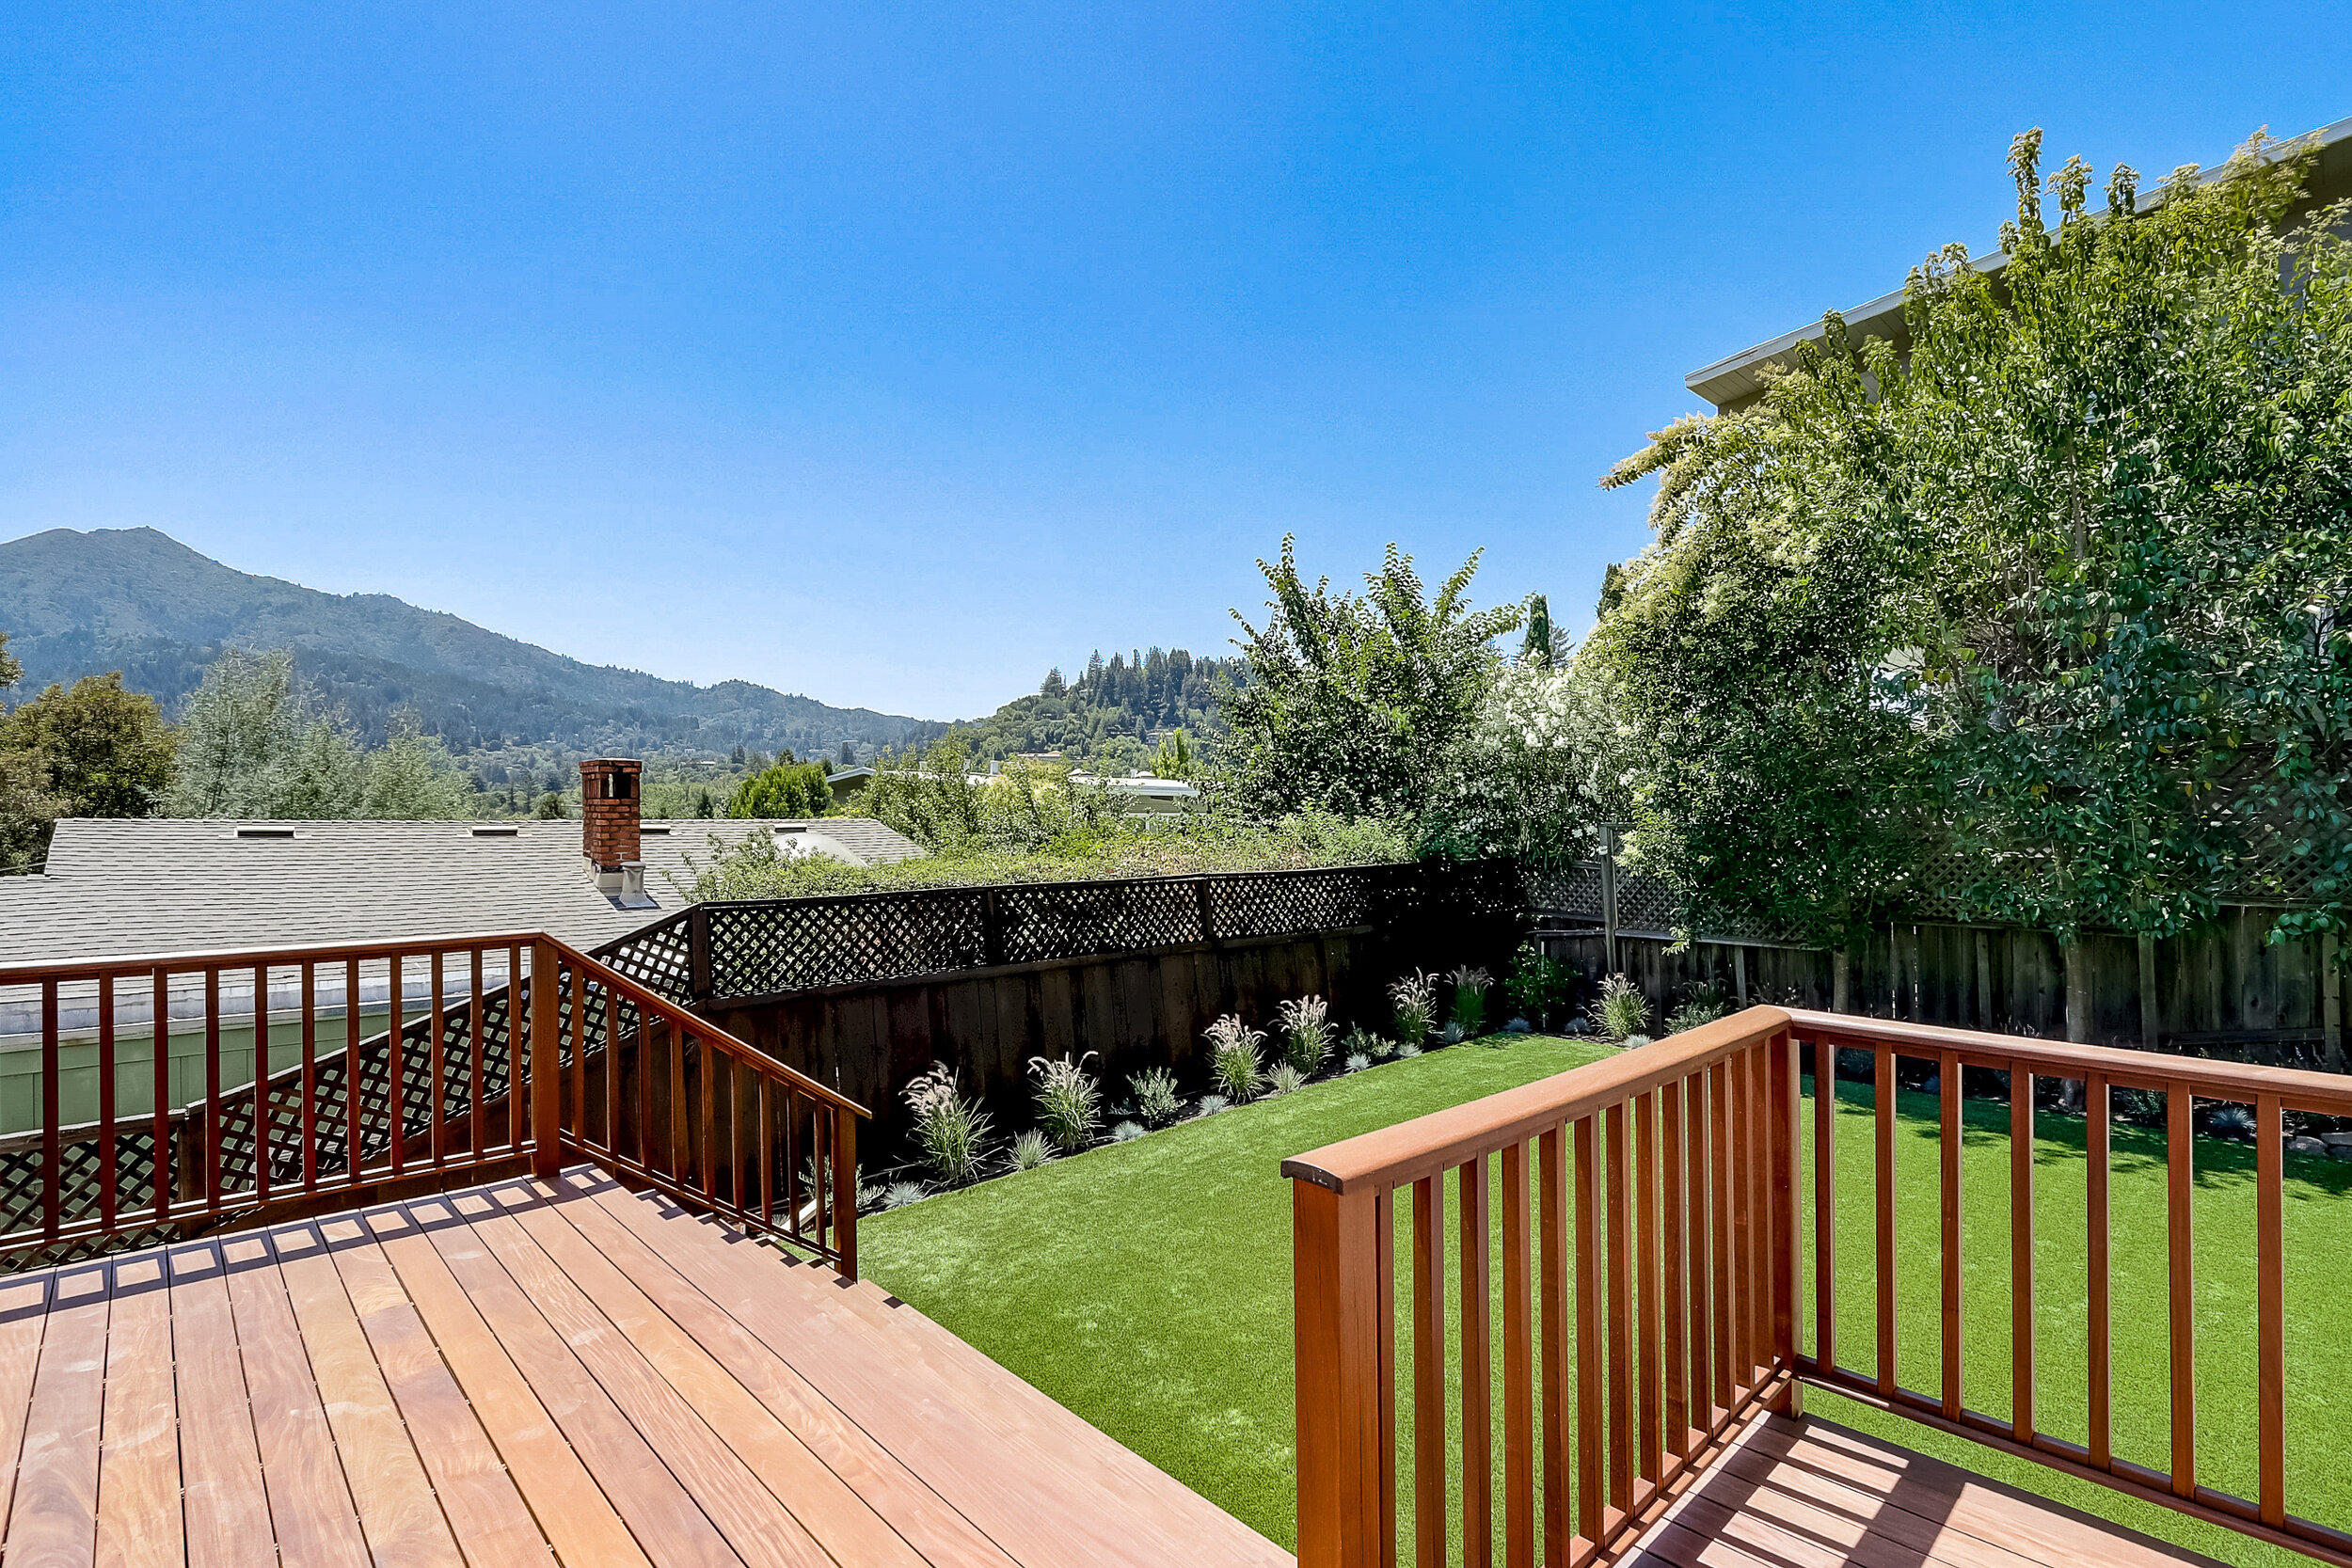 Own Marin Barr Haney Whitney Potter For Sale 9 Terrace Avenue, Kentfield California Marin County #1 Real Esate Agents-53.jpg